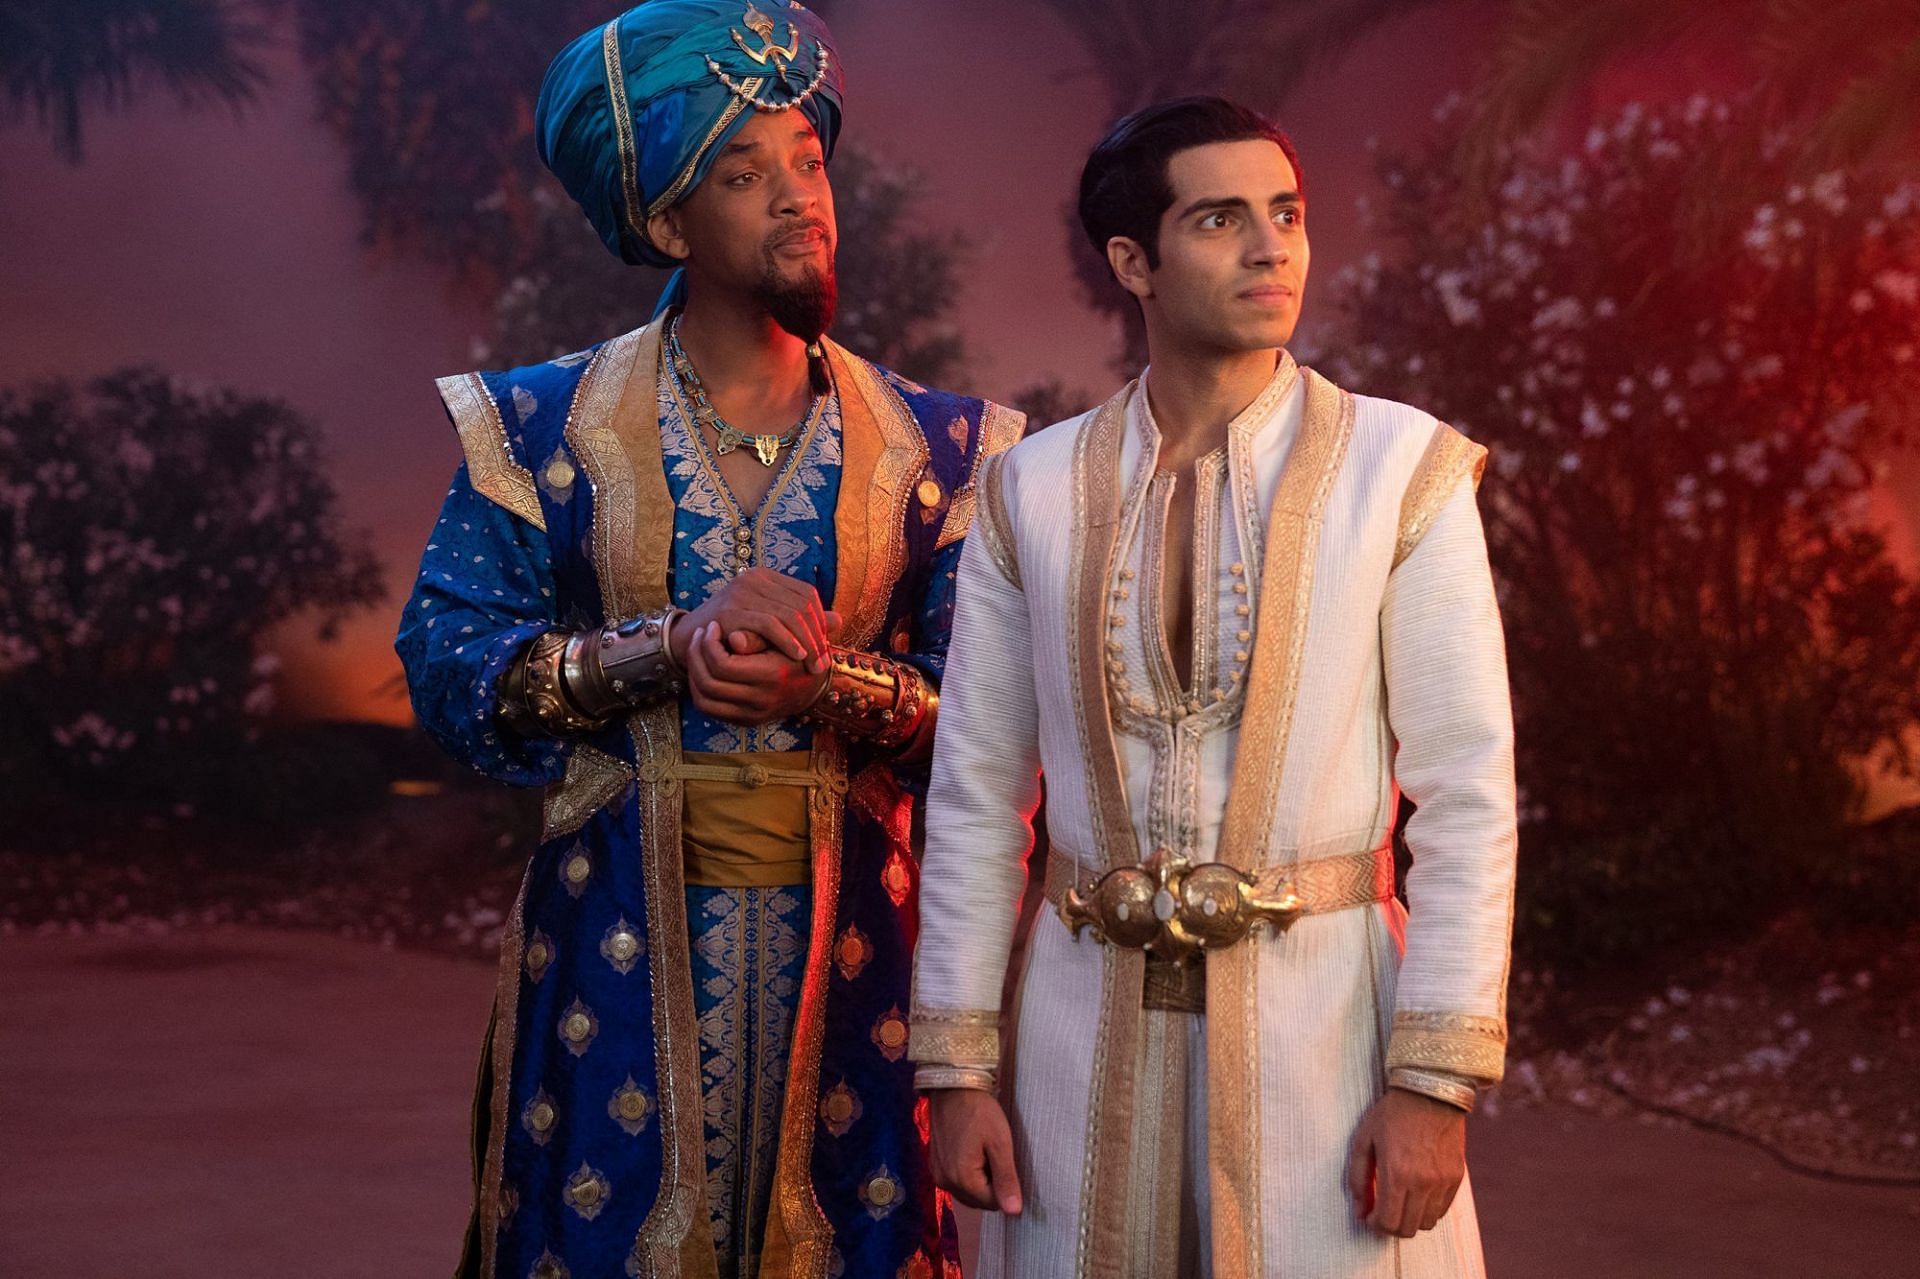 Why the critics were wrong about 'Aladdin' (2019)